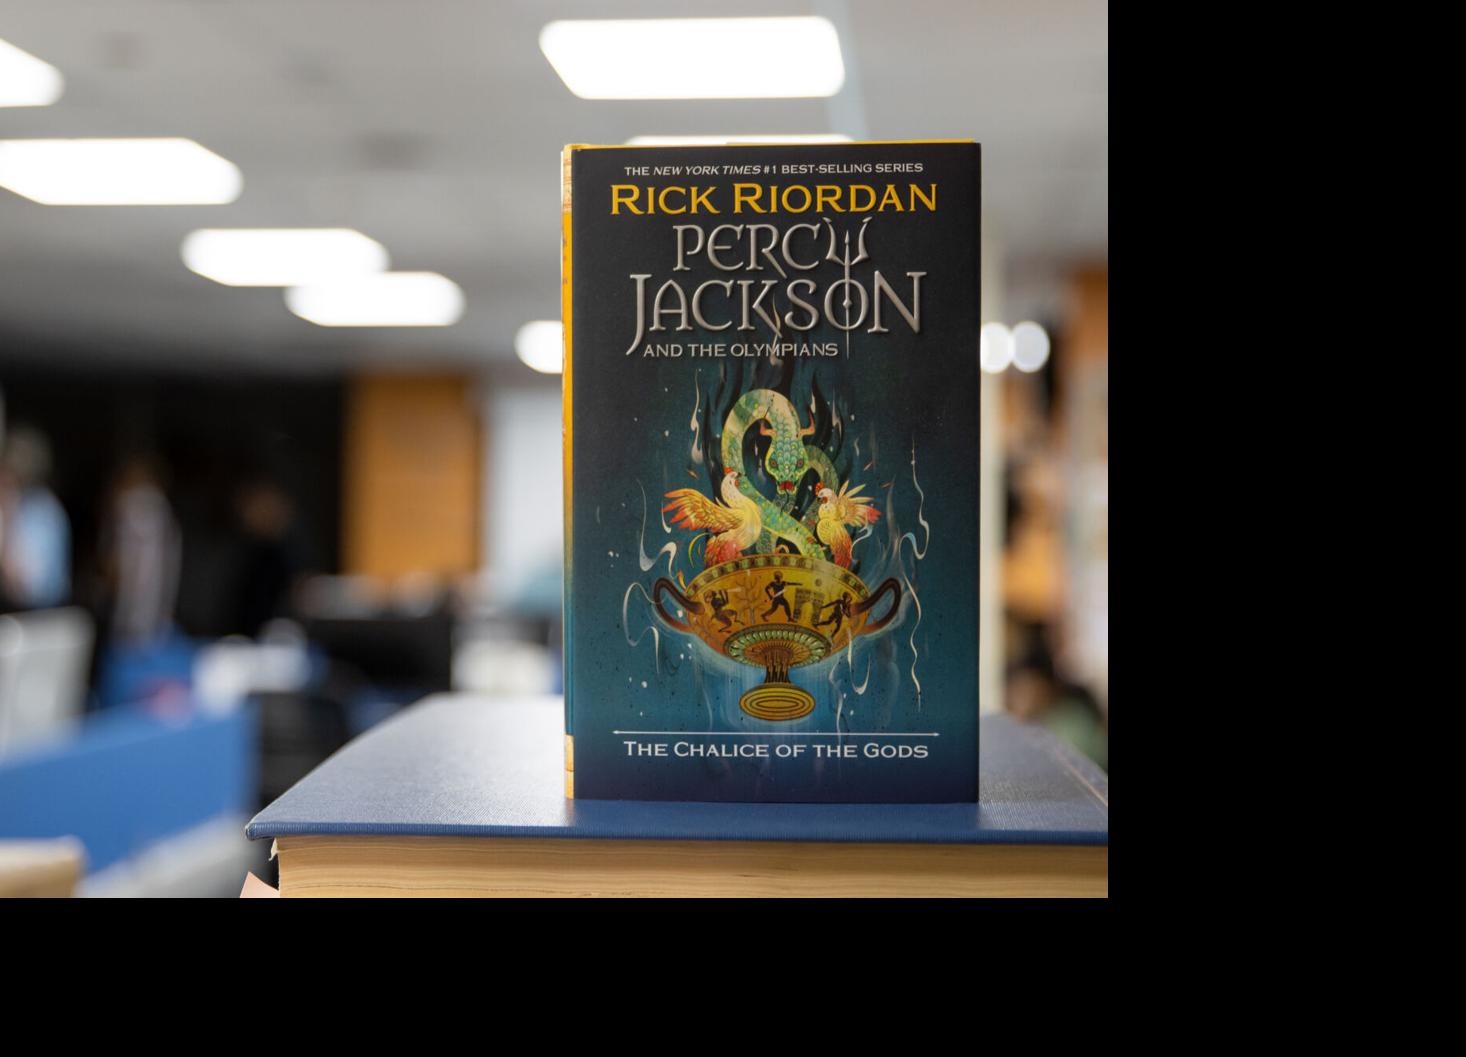 The Chalice of the Gods Percy Jackson and the Olympians by Rick